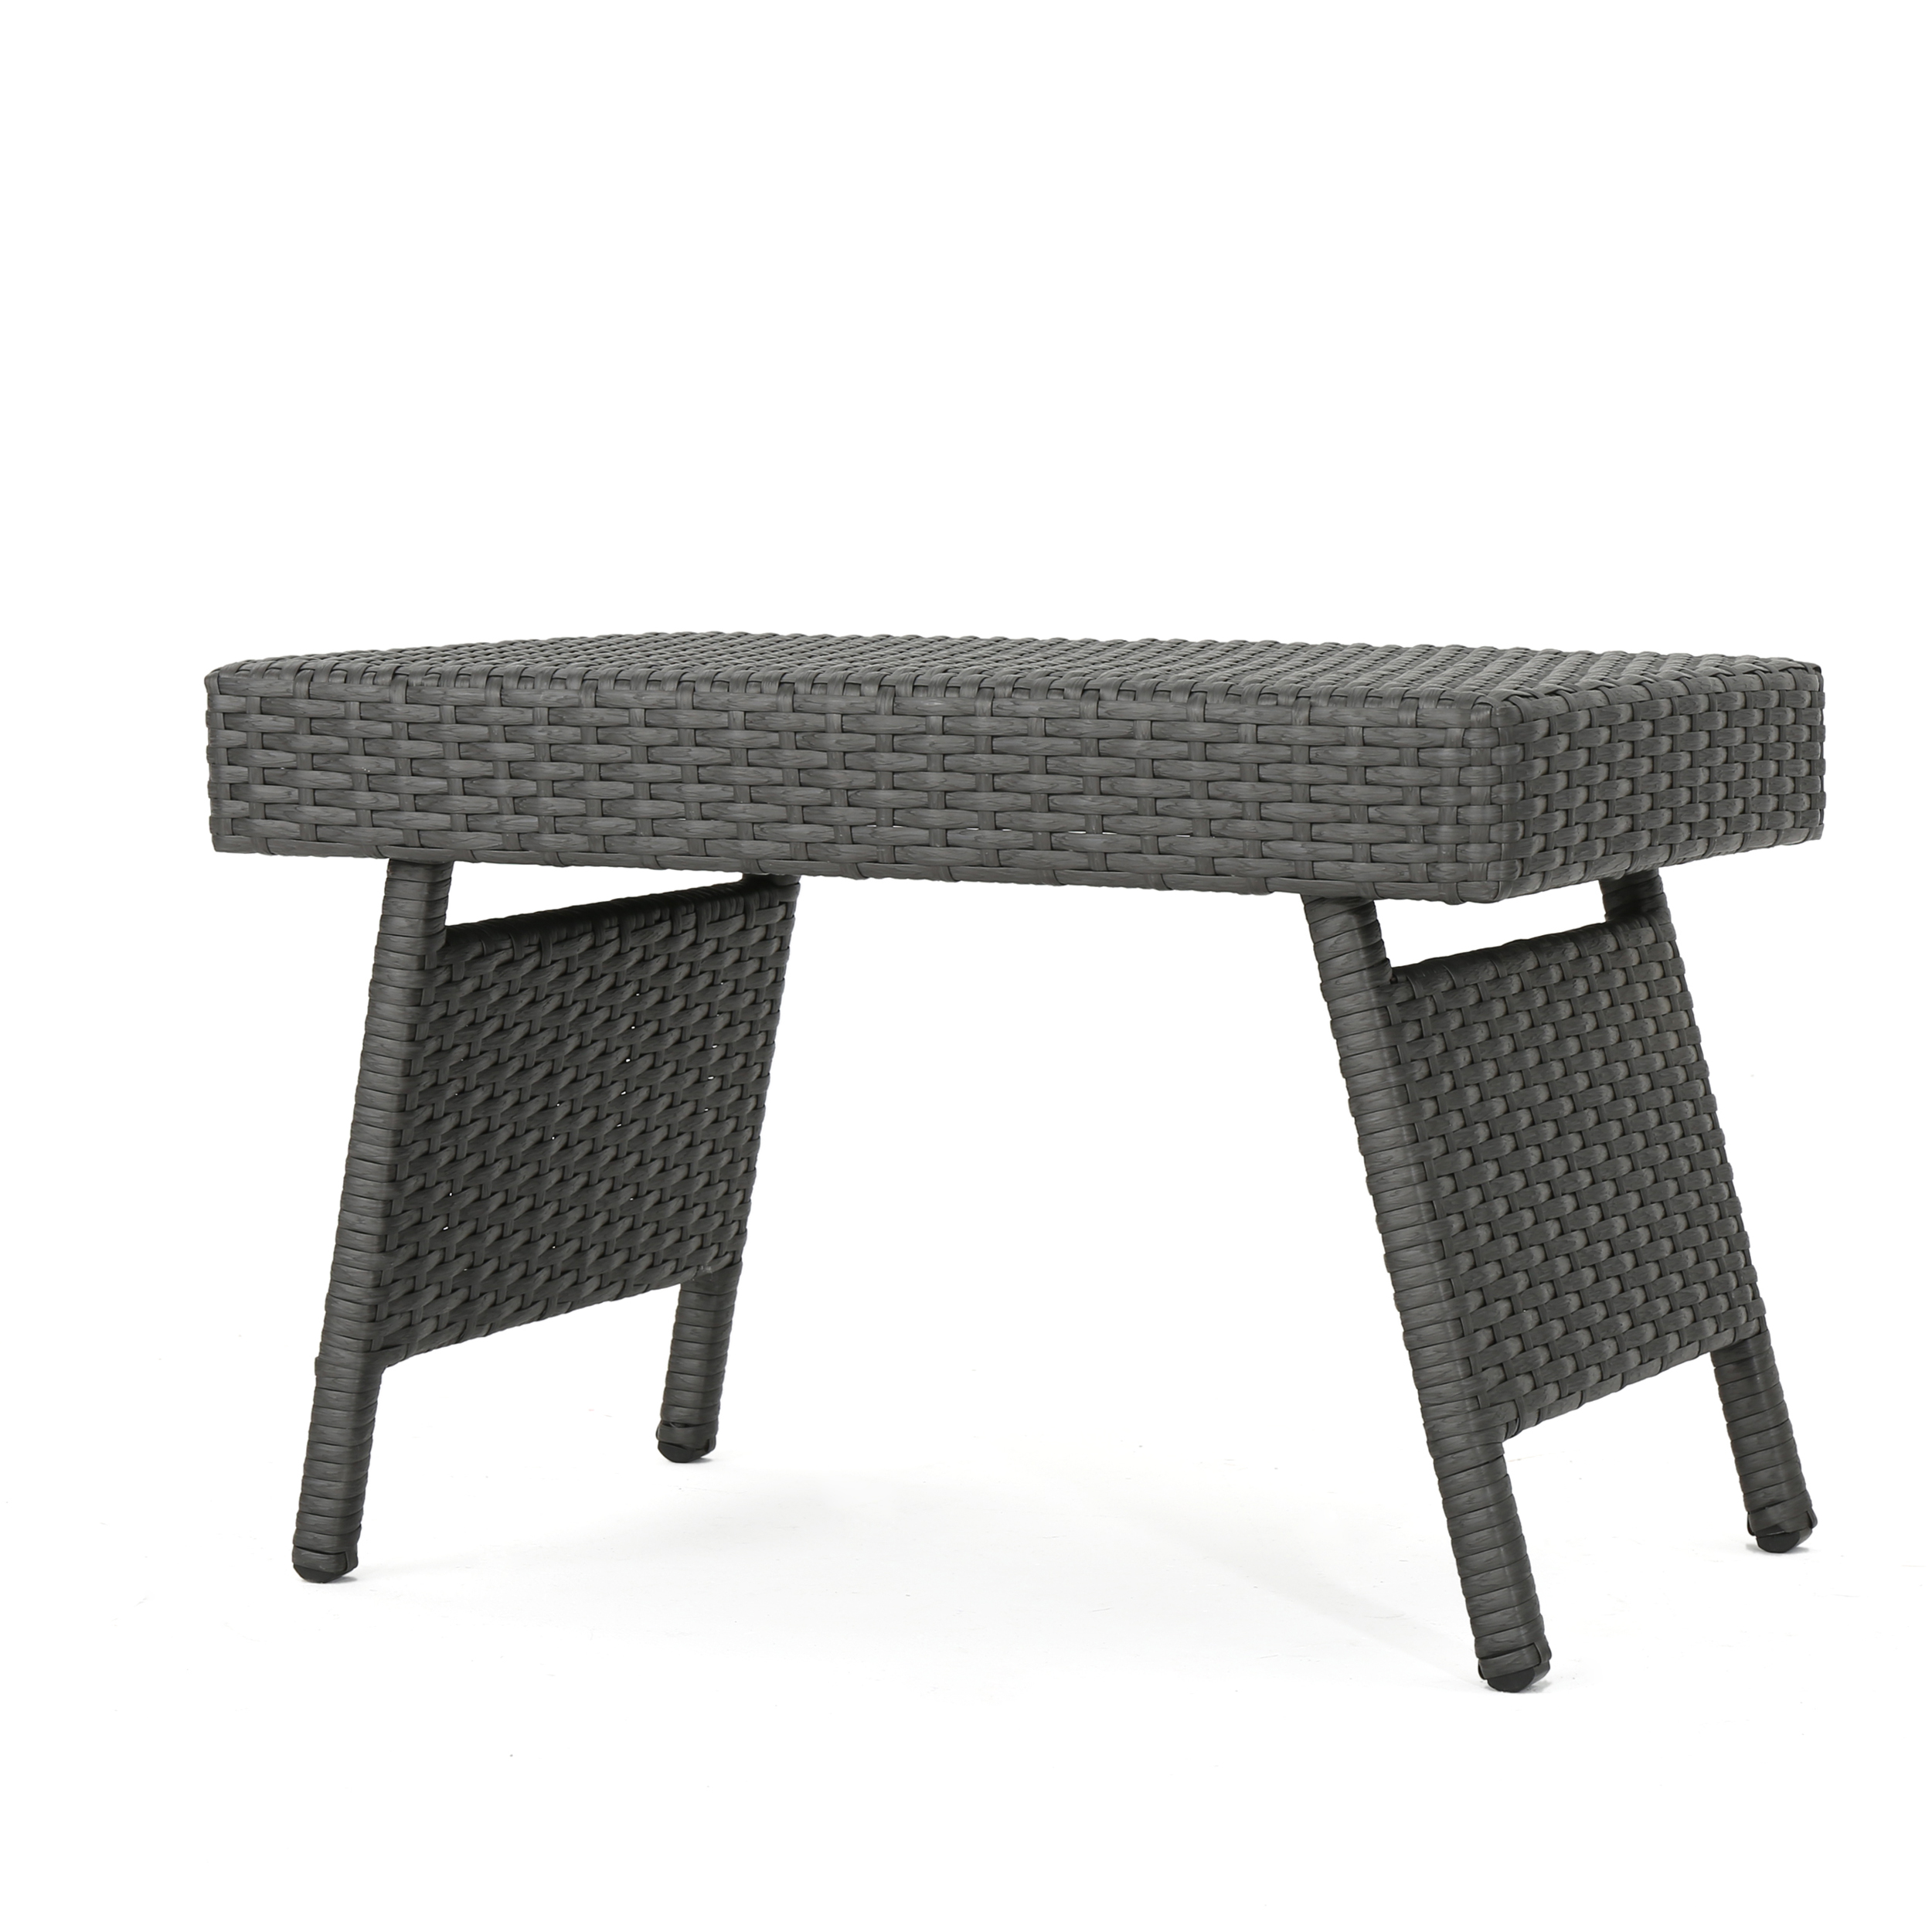 Solaris Outdoor Grey Wicker Armed Chaise Lounge with matching Wicker Accent Table, Grey - image 5 of 6